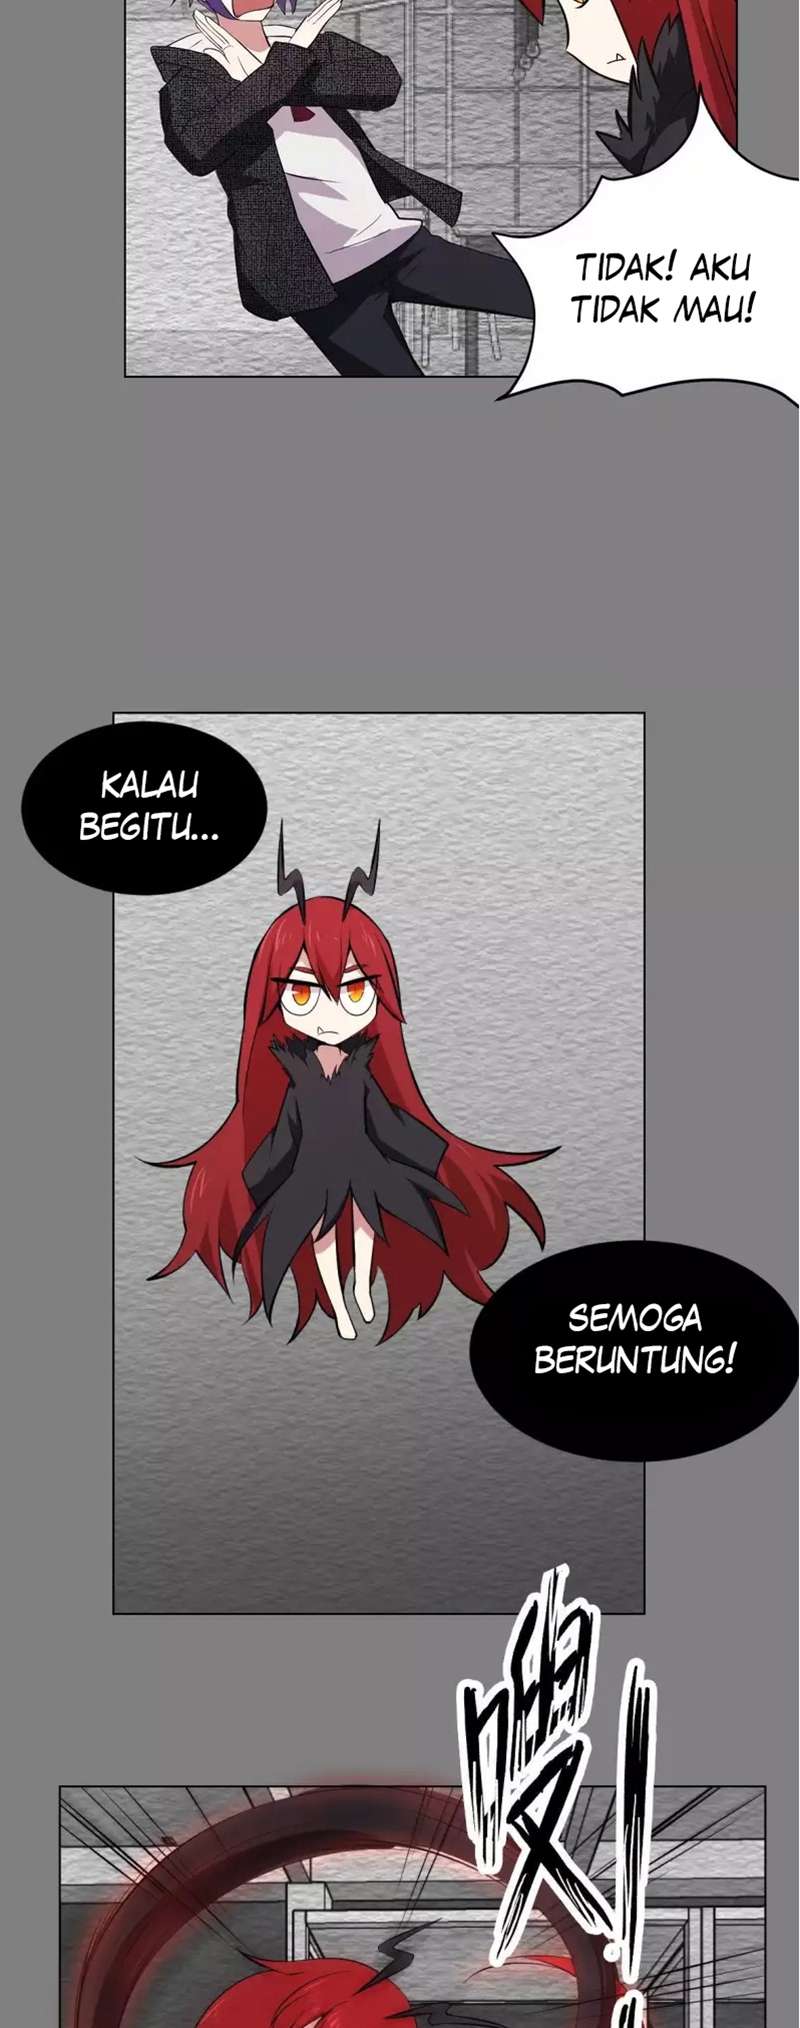 Demon King With Low Blood Chapter 05